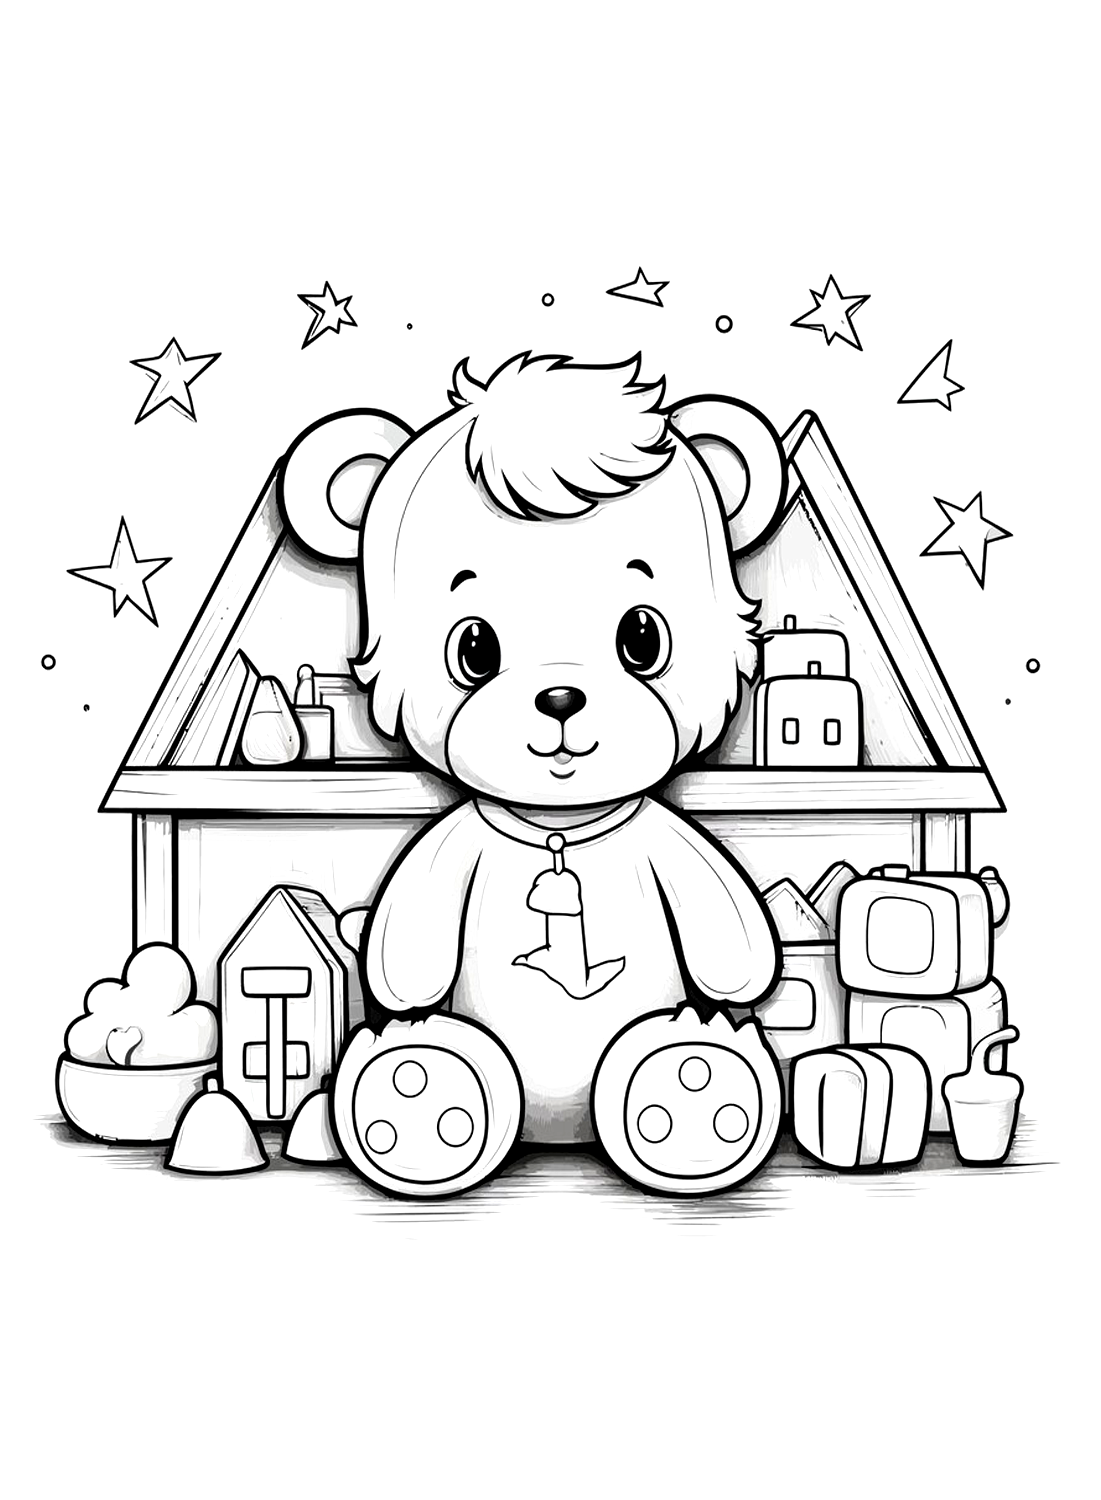 Toy house and teddy bear coloring sheets